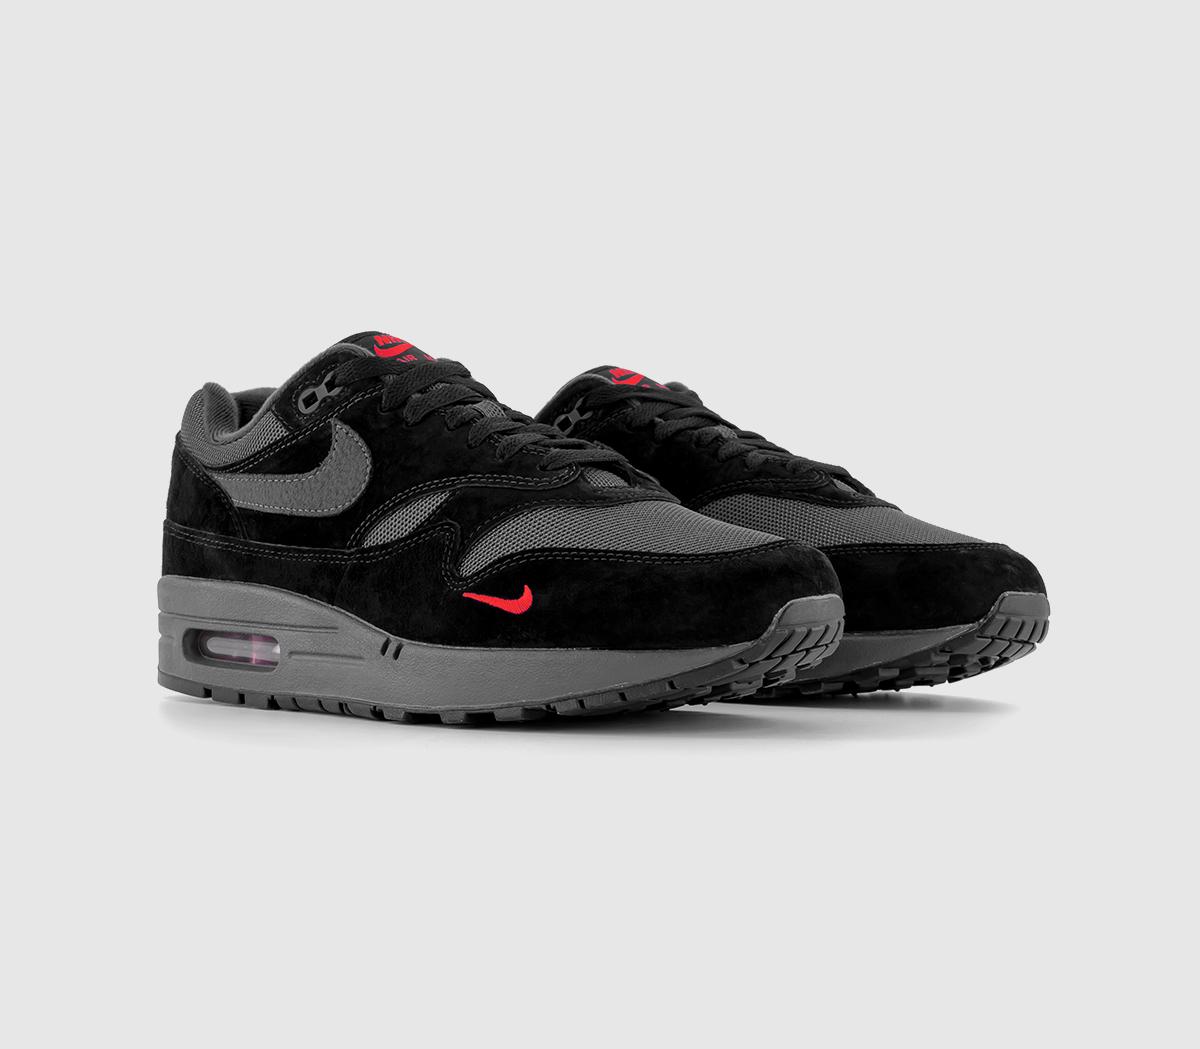 Nike Mens Air Max 1 Trainers Black Anthracite University Red, 10